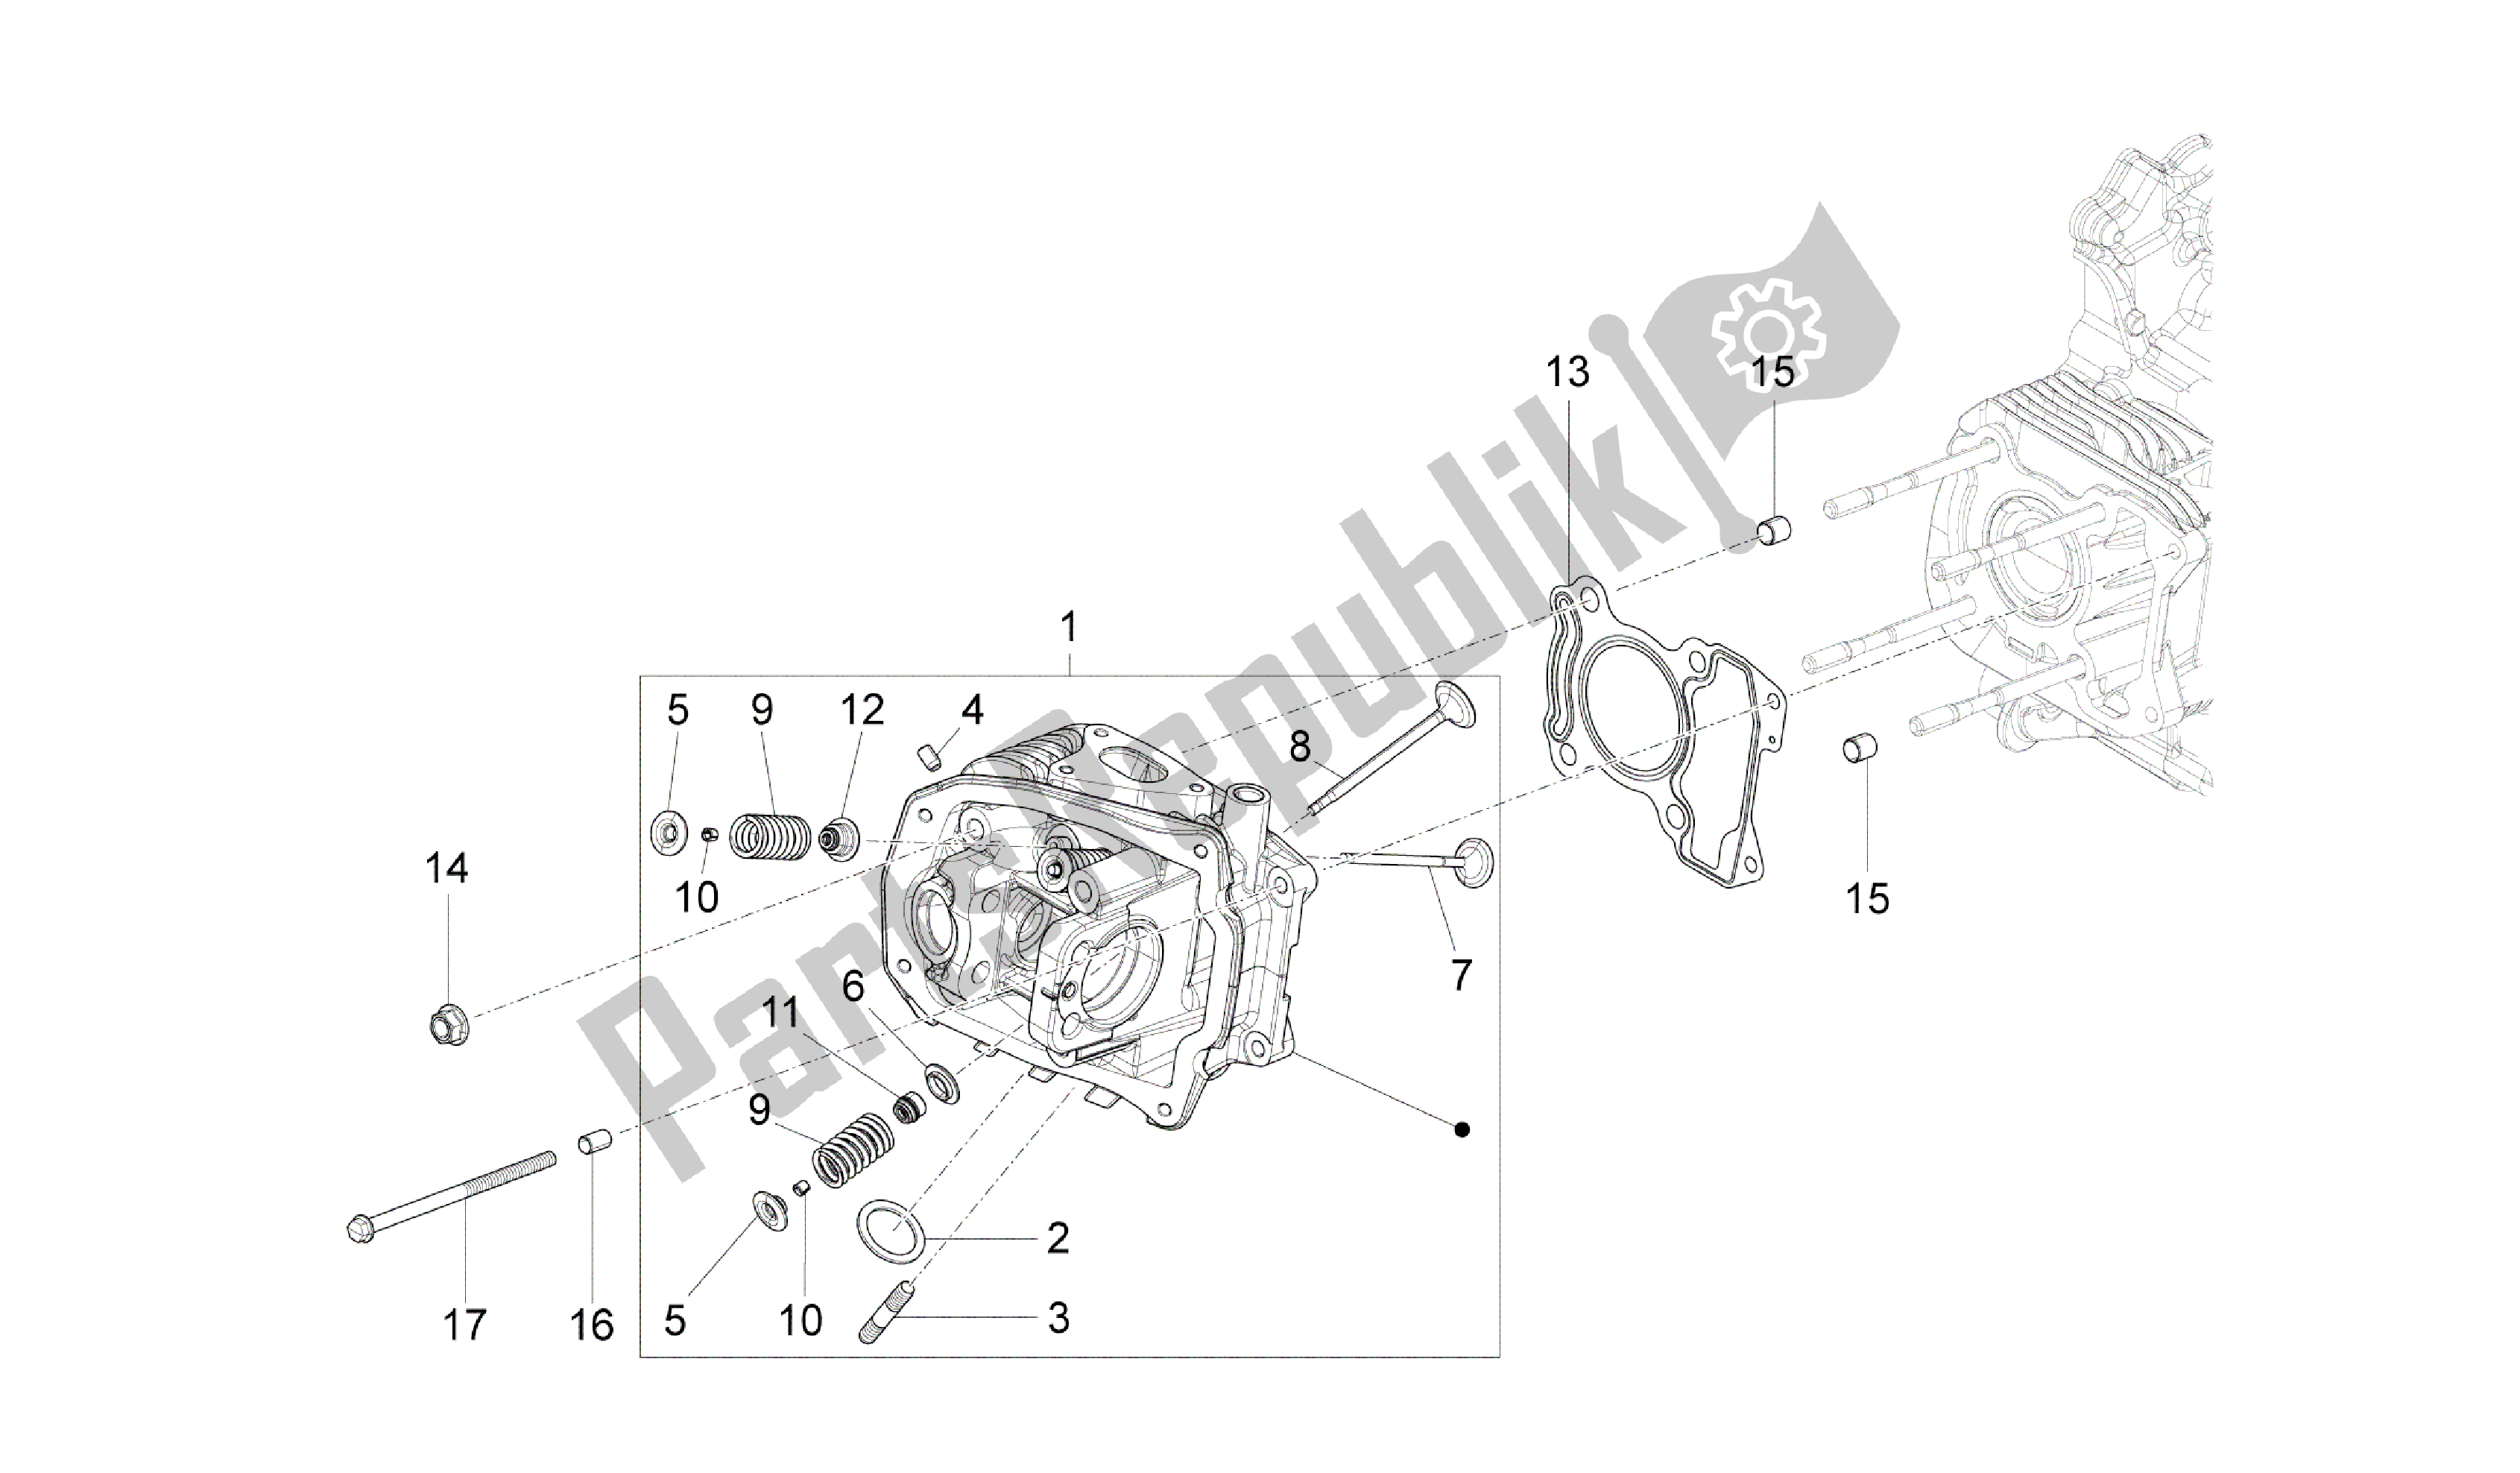 All parts for the Head Unit - Valve of the Vespa 946 150 2013 - 2014